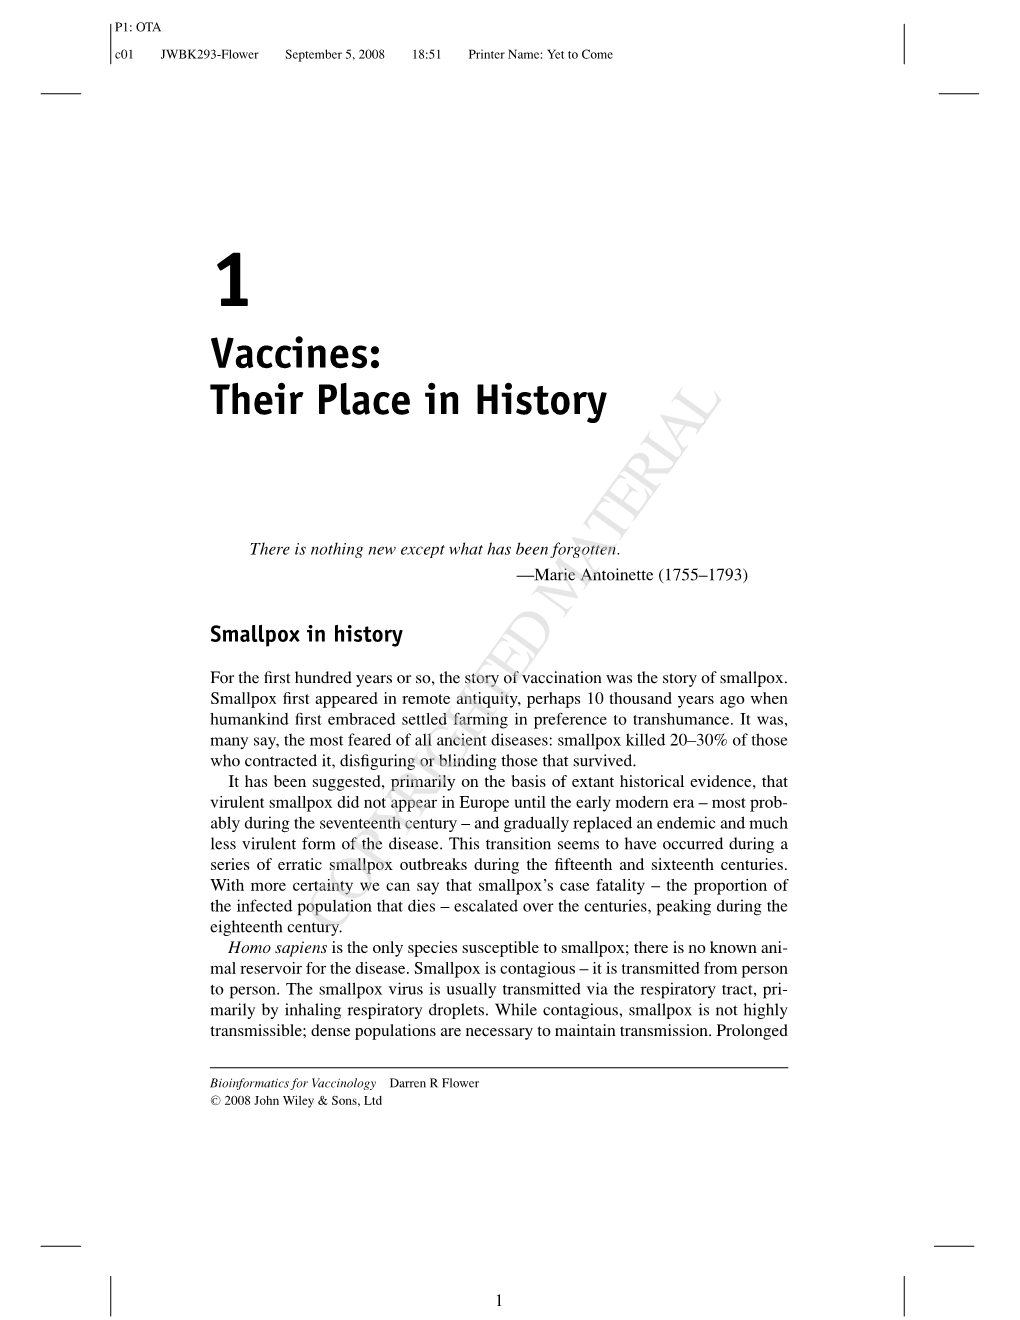 1 Vaccines: Their Place in History